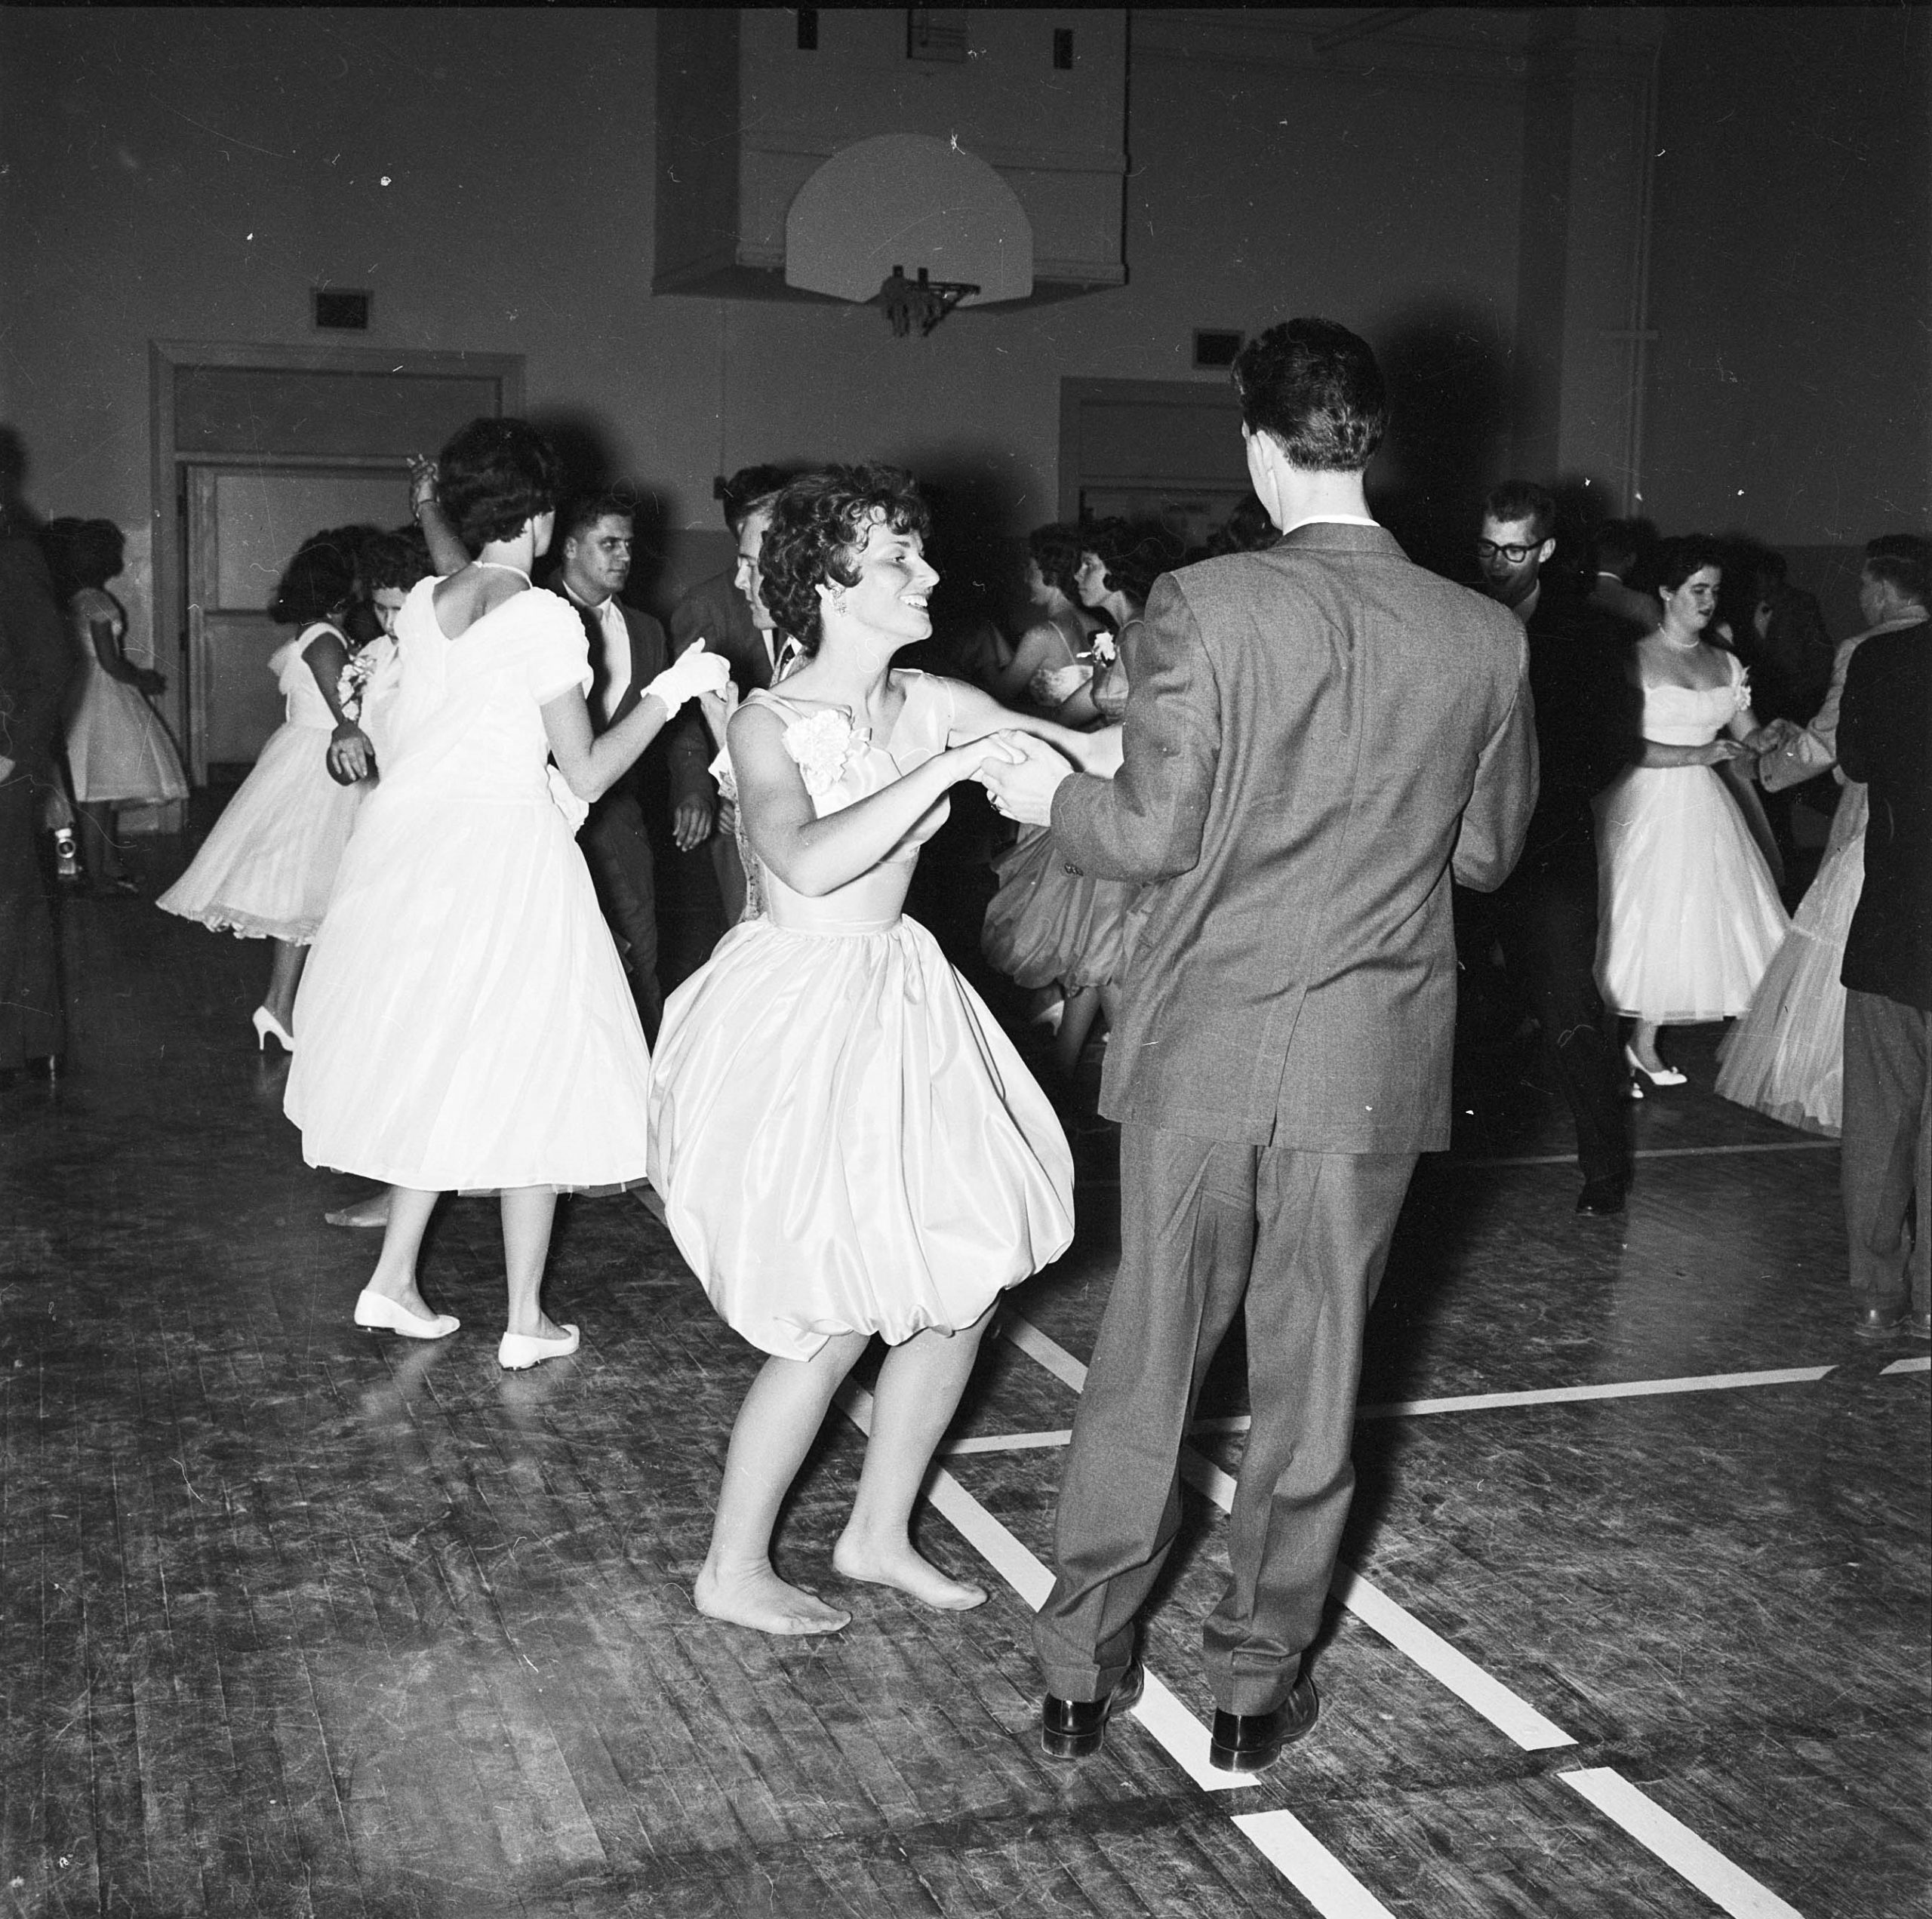 Black and white photograph of young men in suits and women in dresses dancing on a gym floor.